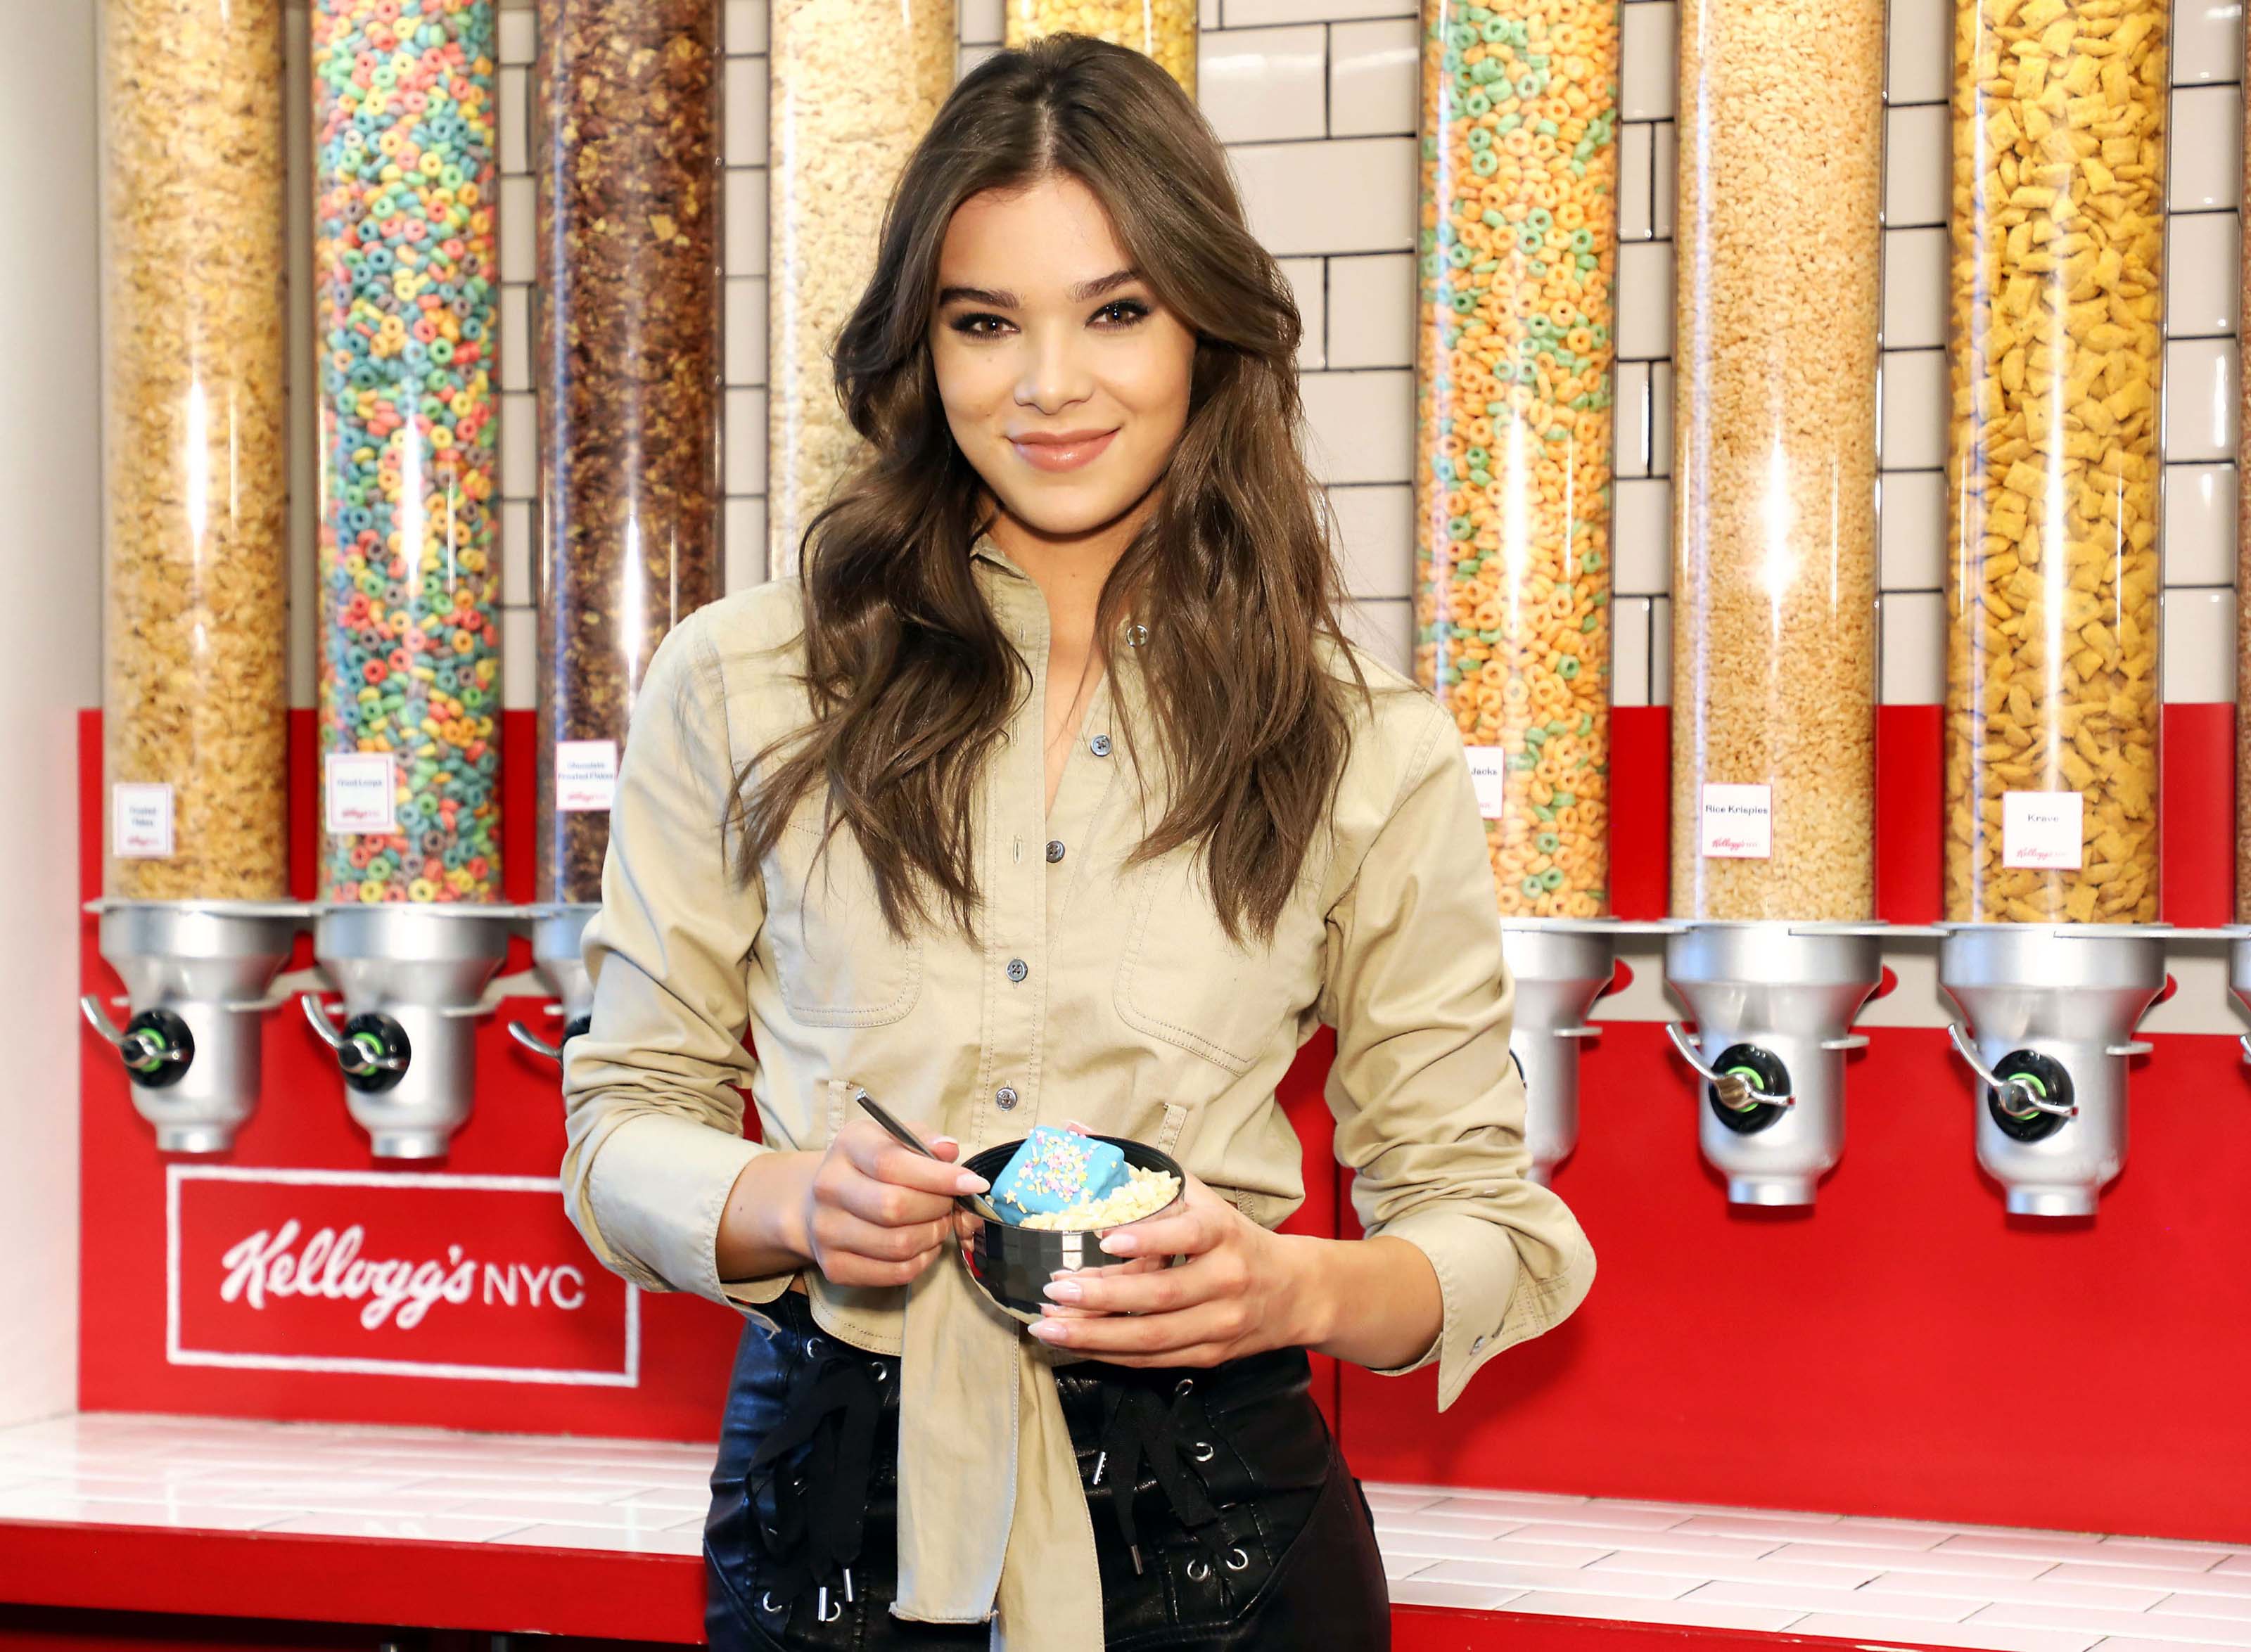 Hailee Steinfeld at Kellogg’s NYC Cafe